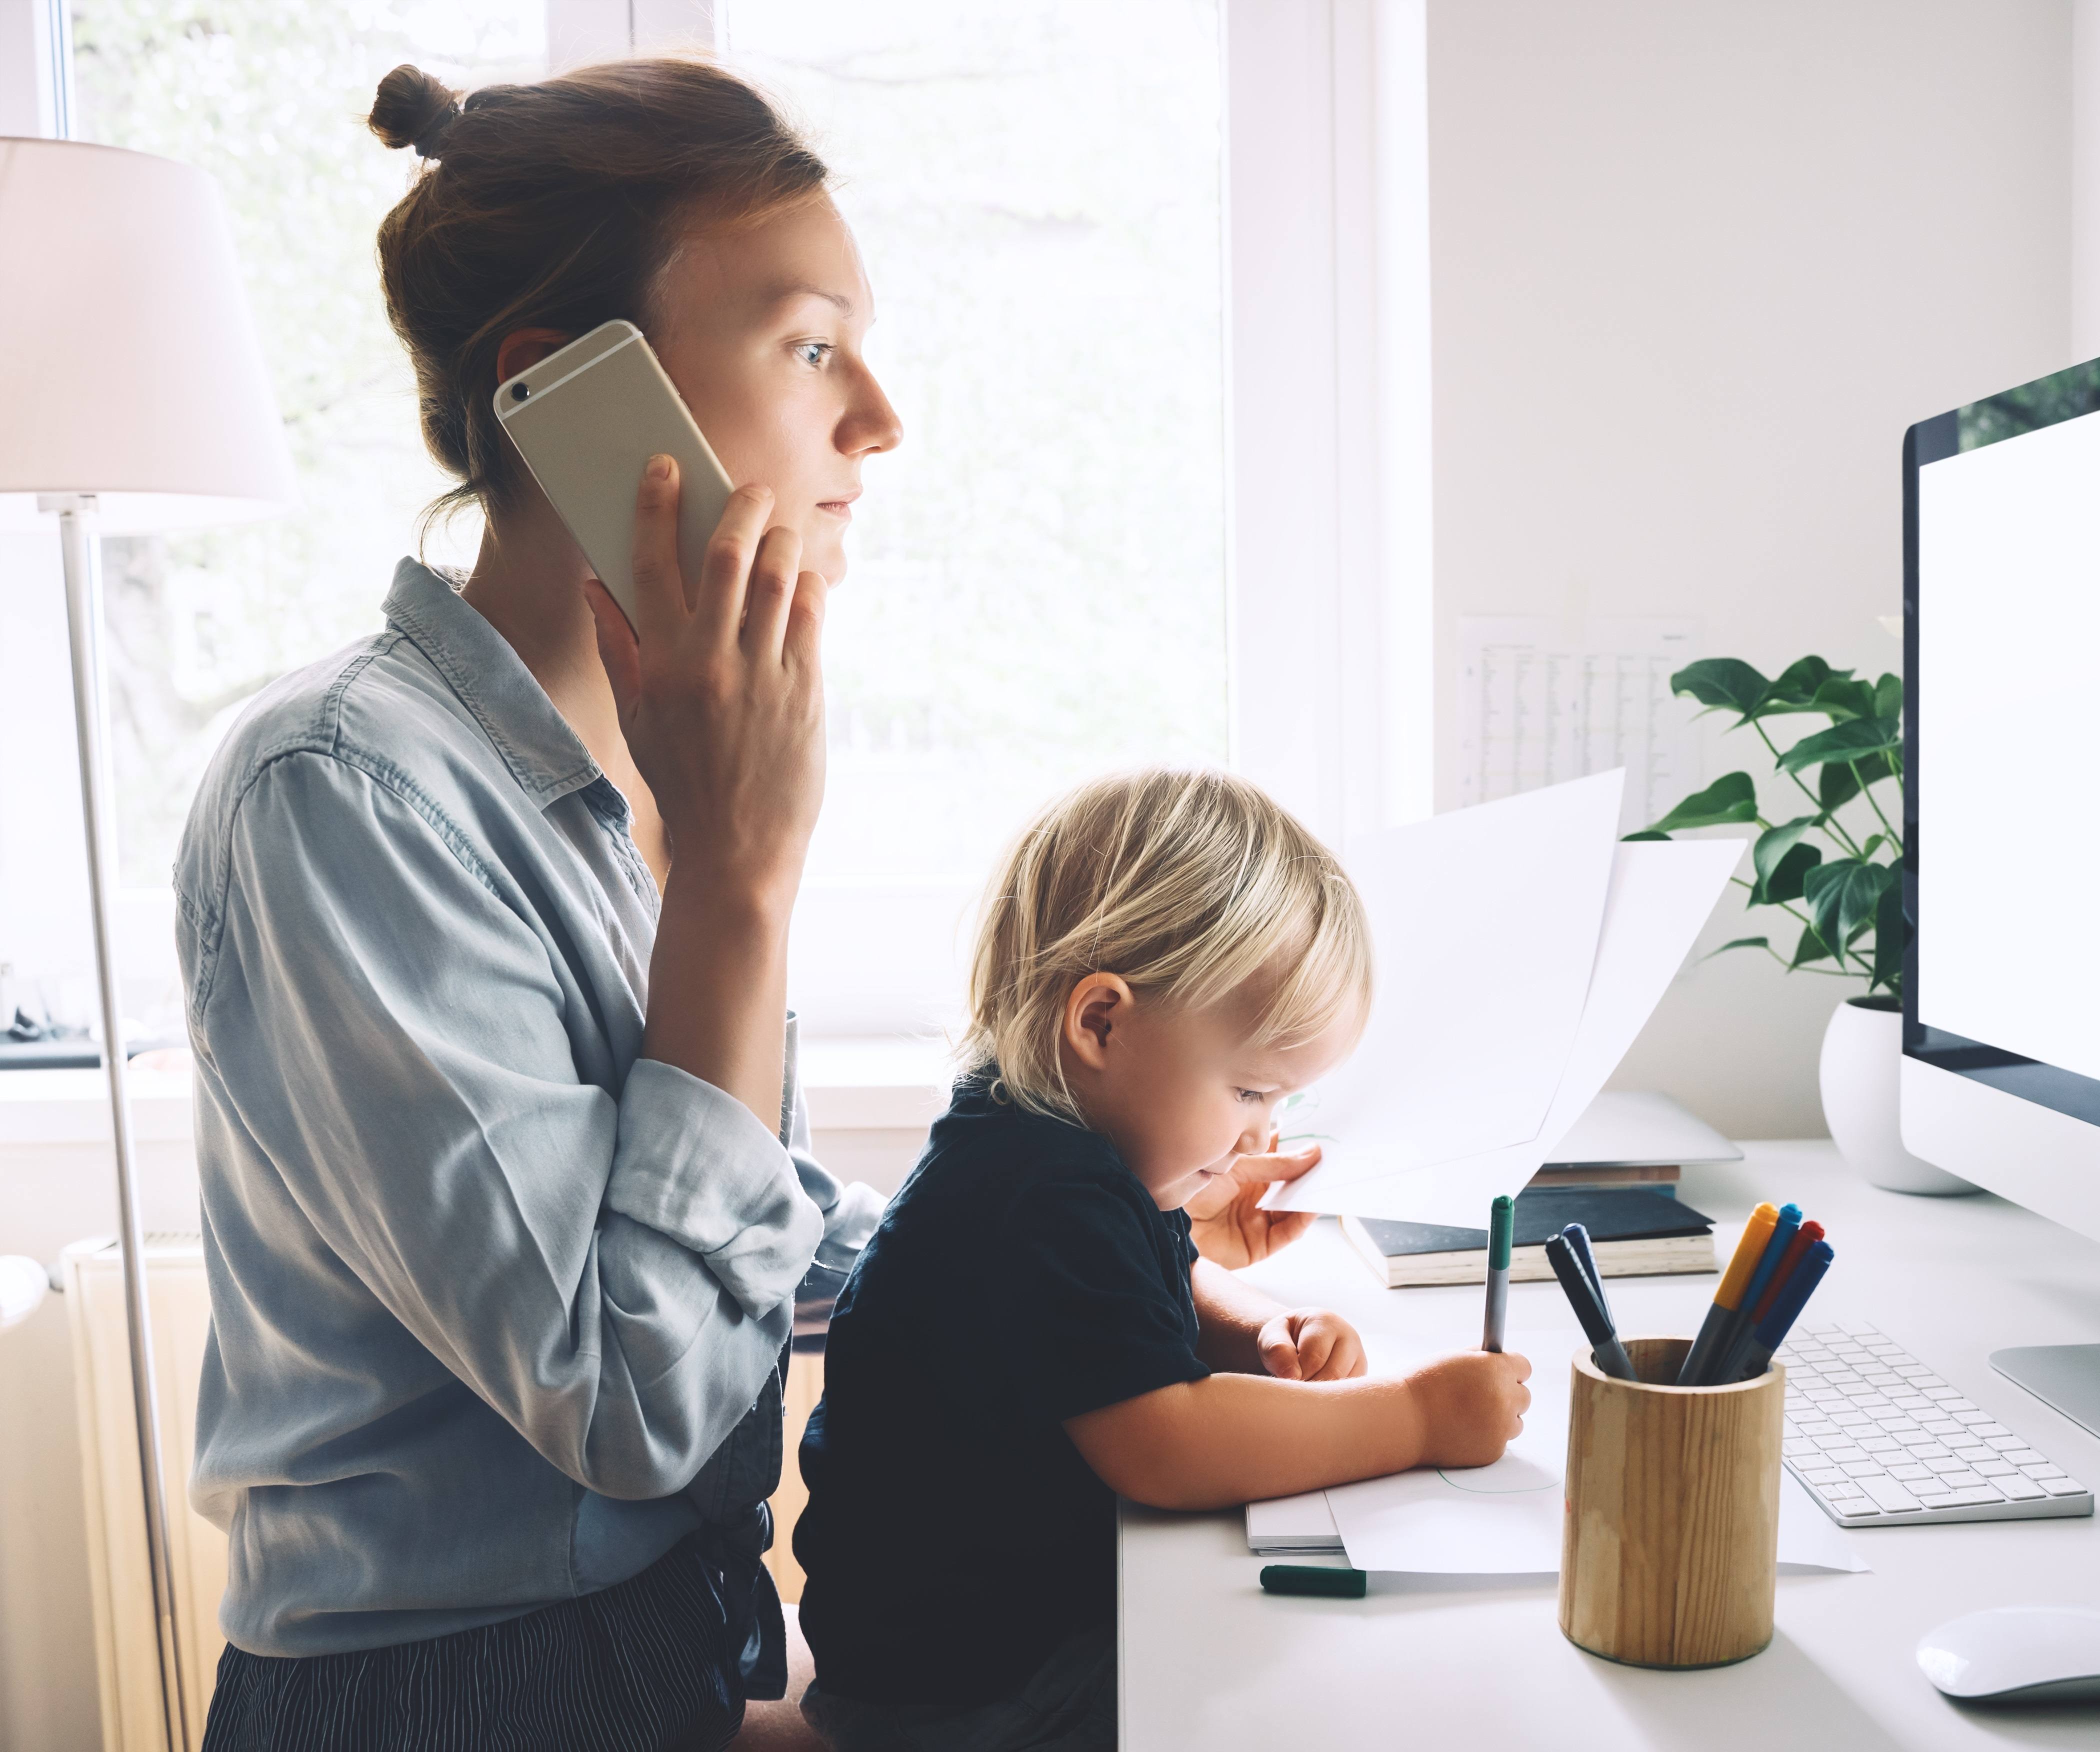 Modern mom balances between work and child home schooling on sick leave or quarantine. Mother works from home with kid. Woman responding on phone calls, working on computer with a toddler on her lap.